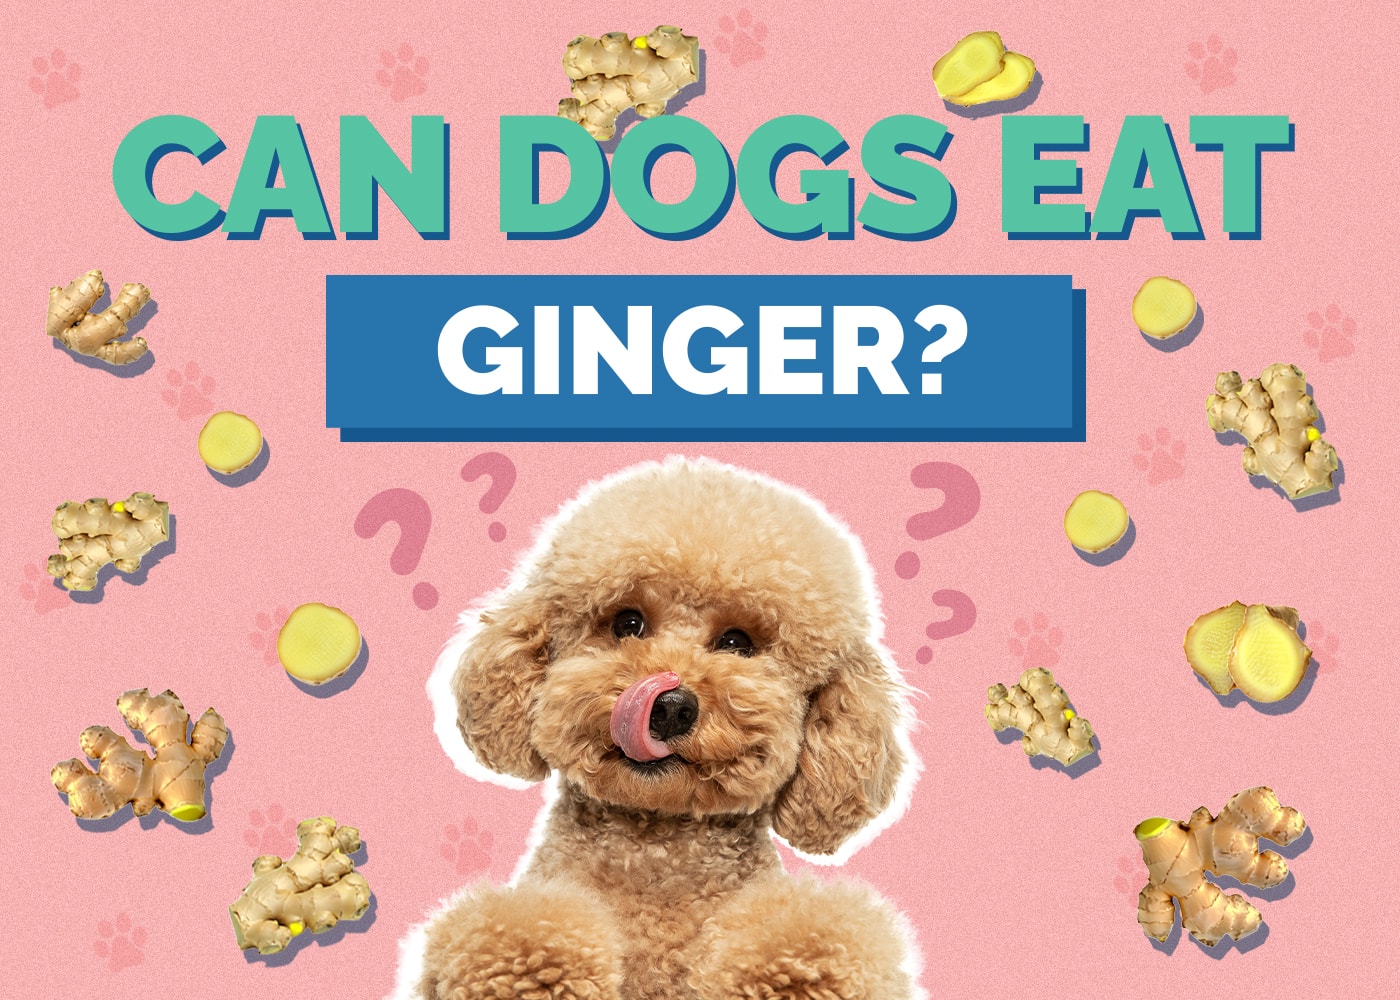 Can Dogs Eat ginger